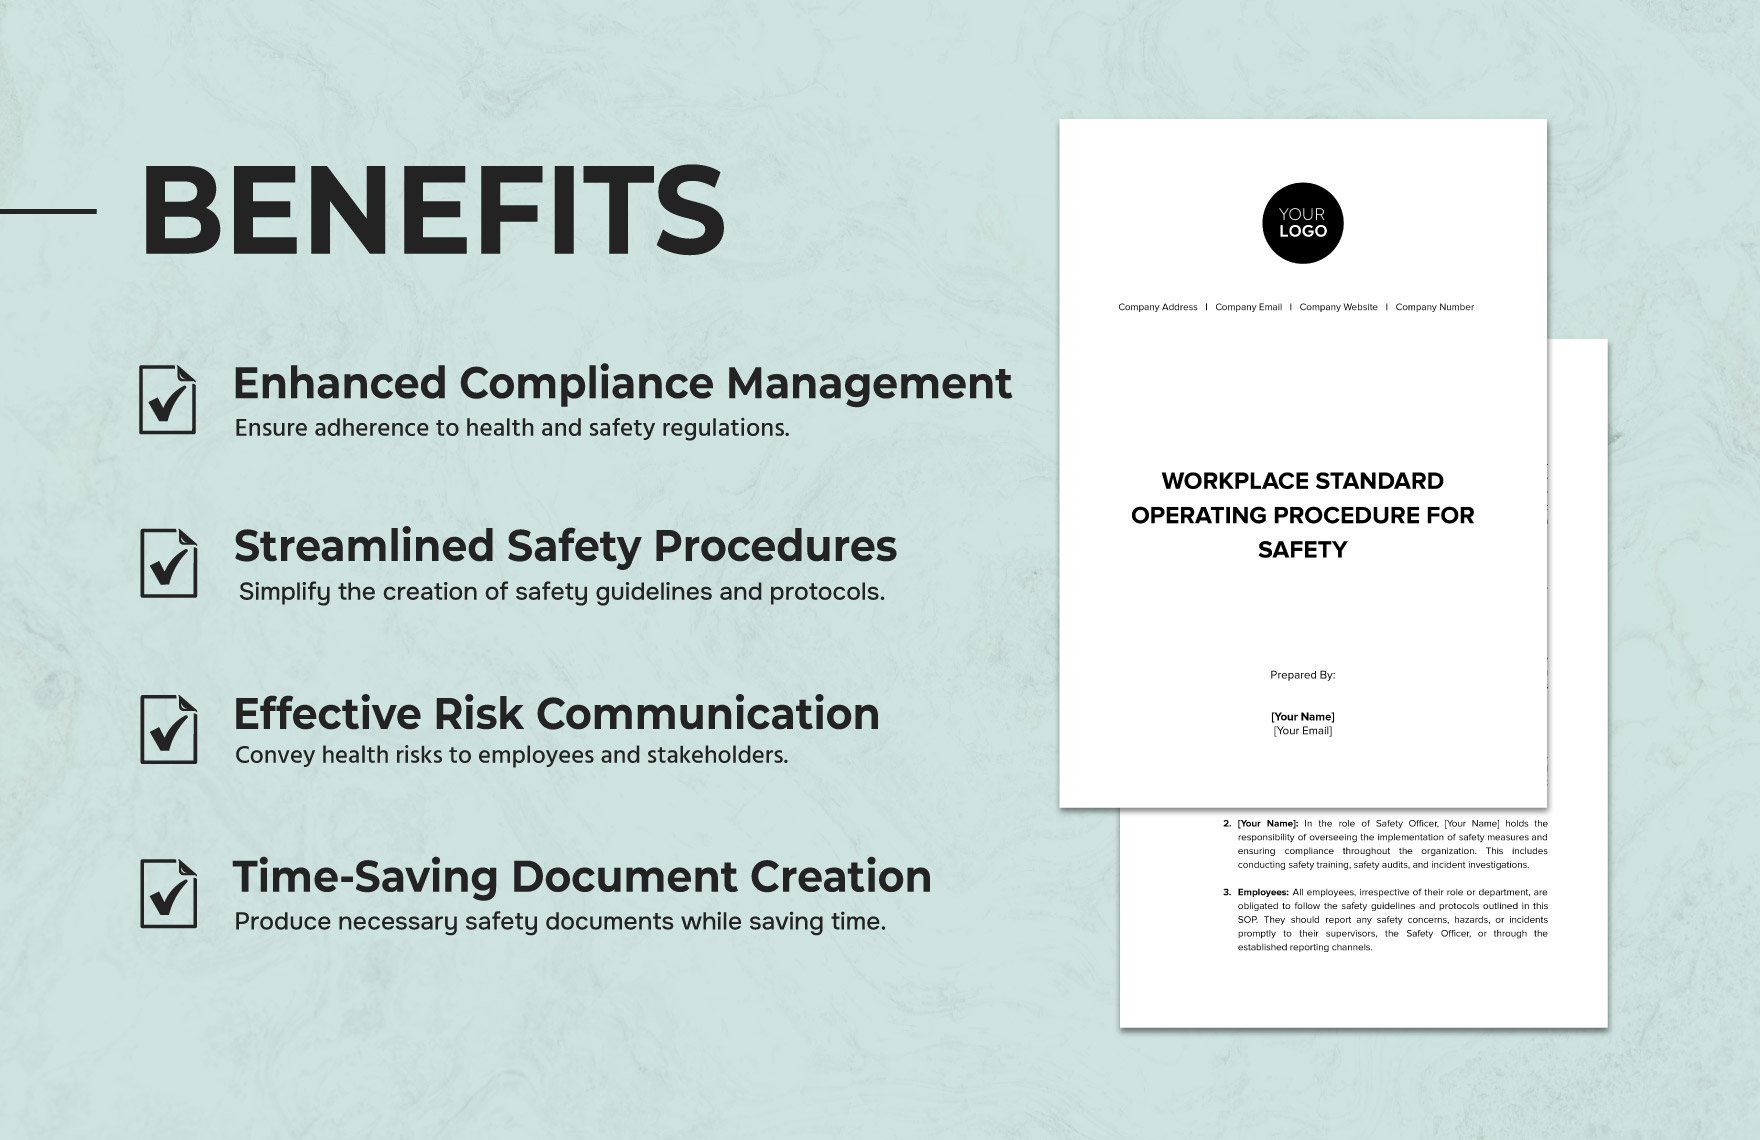 Workplace Standard Operating Procedure for Safety Template